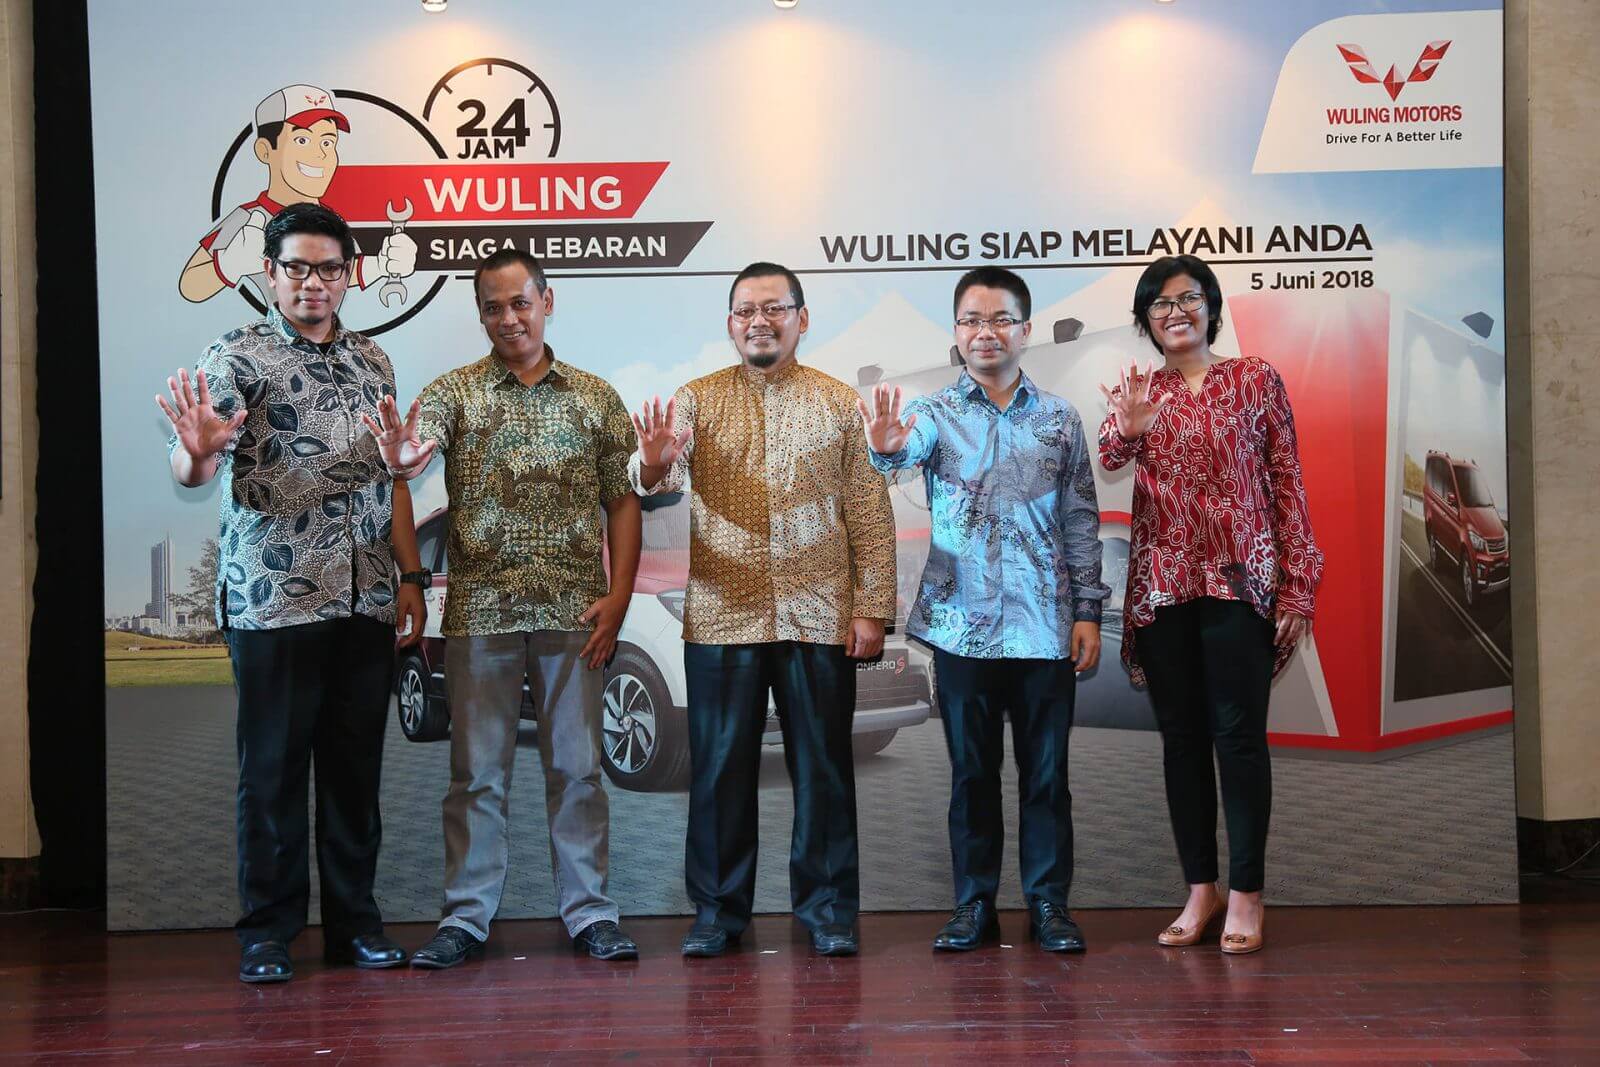 Image Wuling Prepares 29 Service Points during Lebaran Holiday